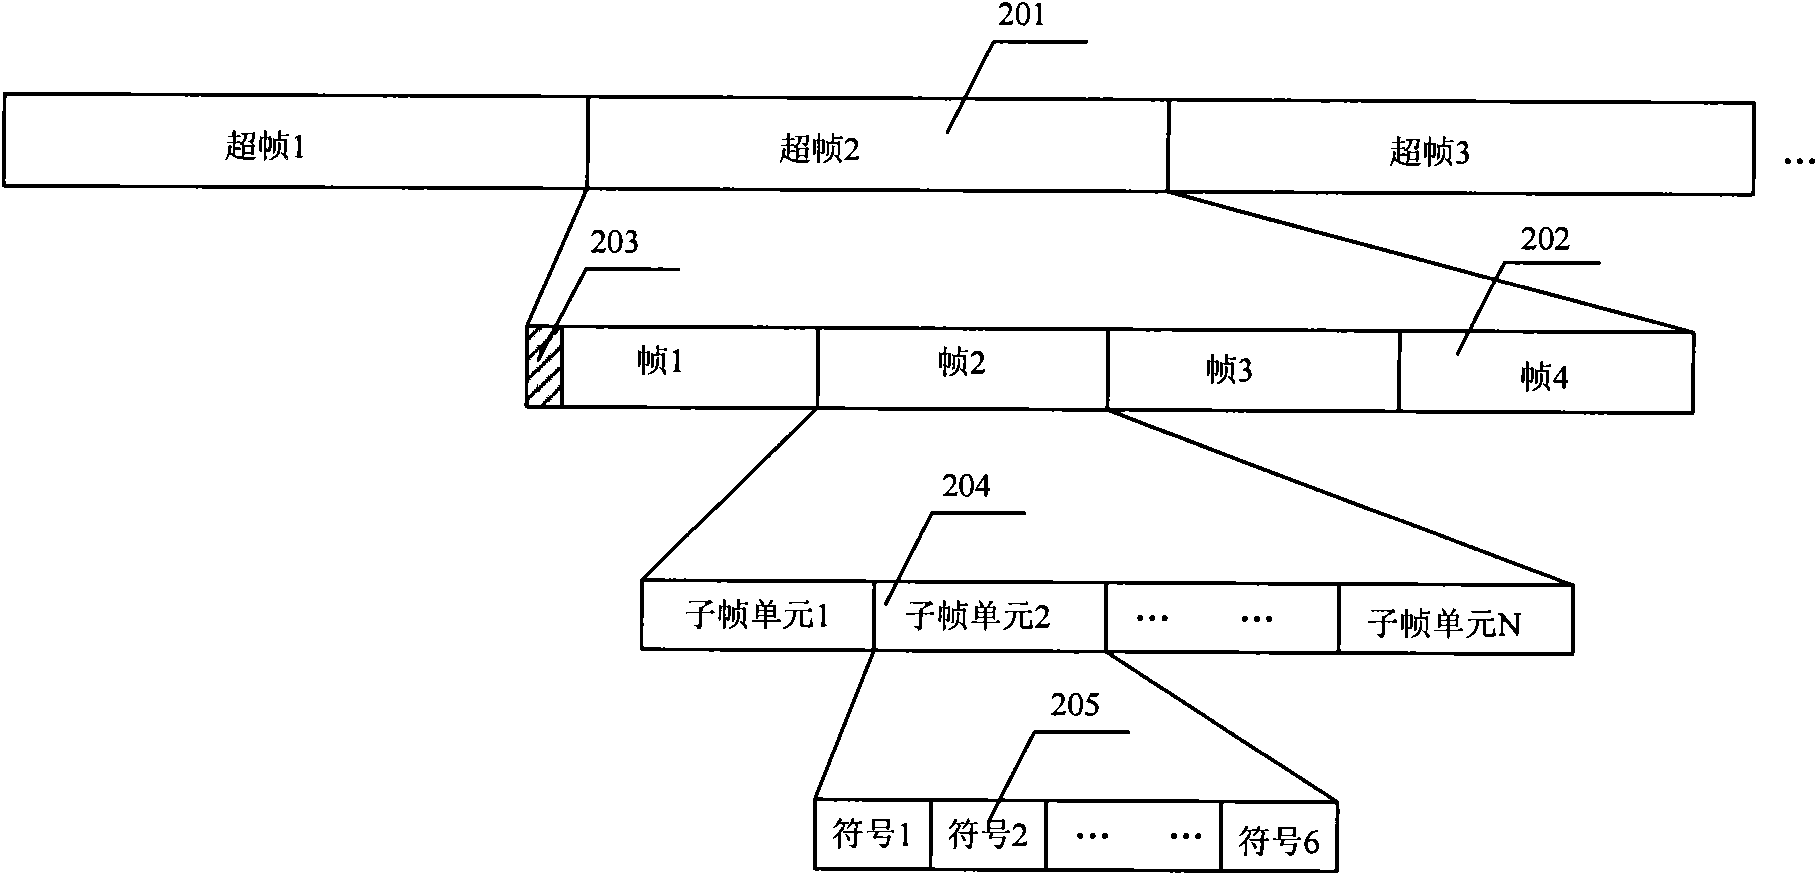 Synchronous non-self-adapting hybrid automatic repeat request method and system